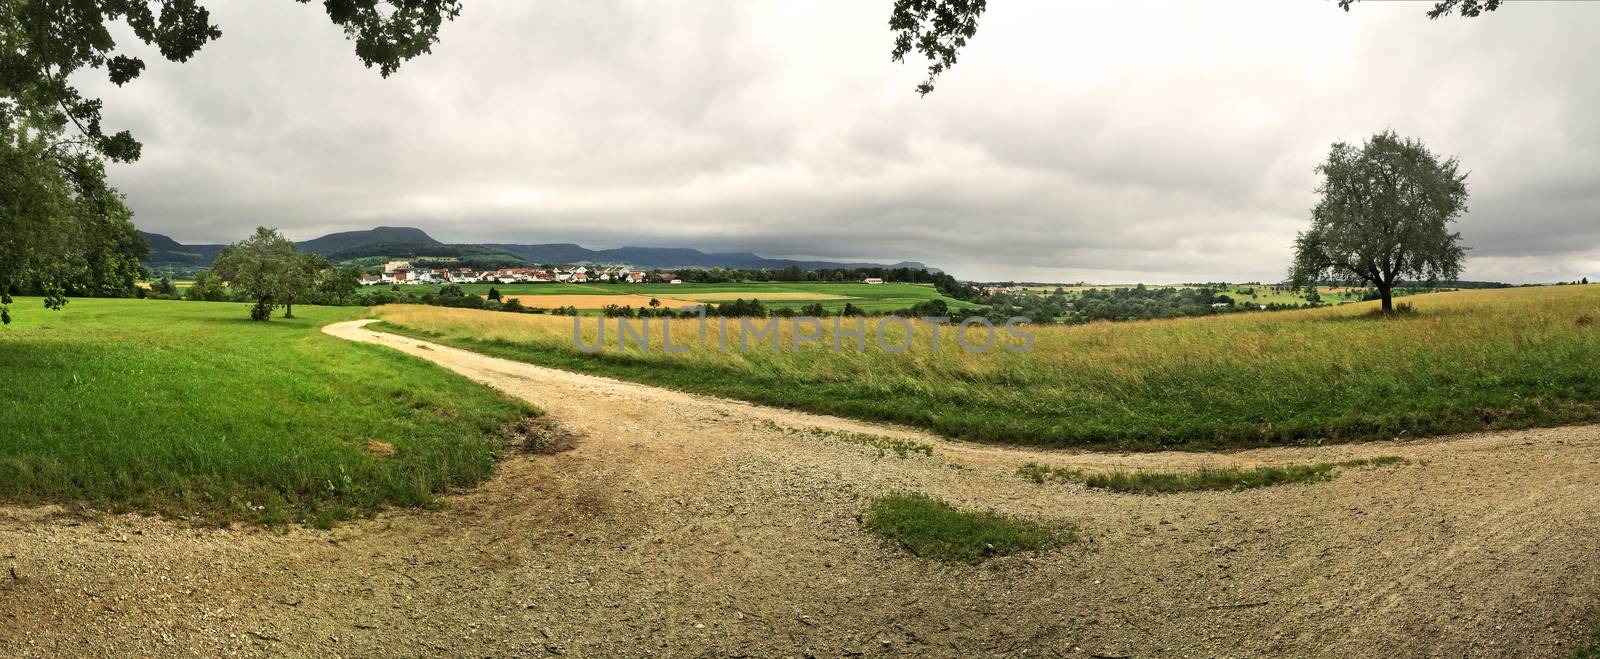 panoramic view to the Swabian highlands in Germany